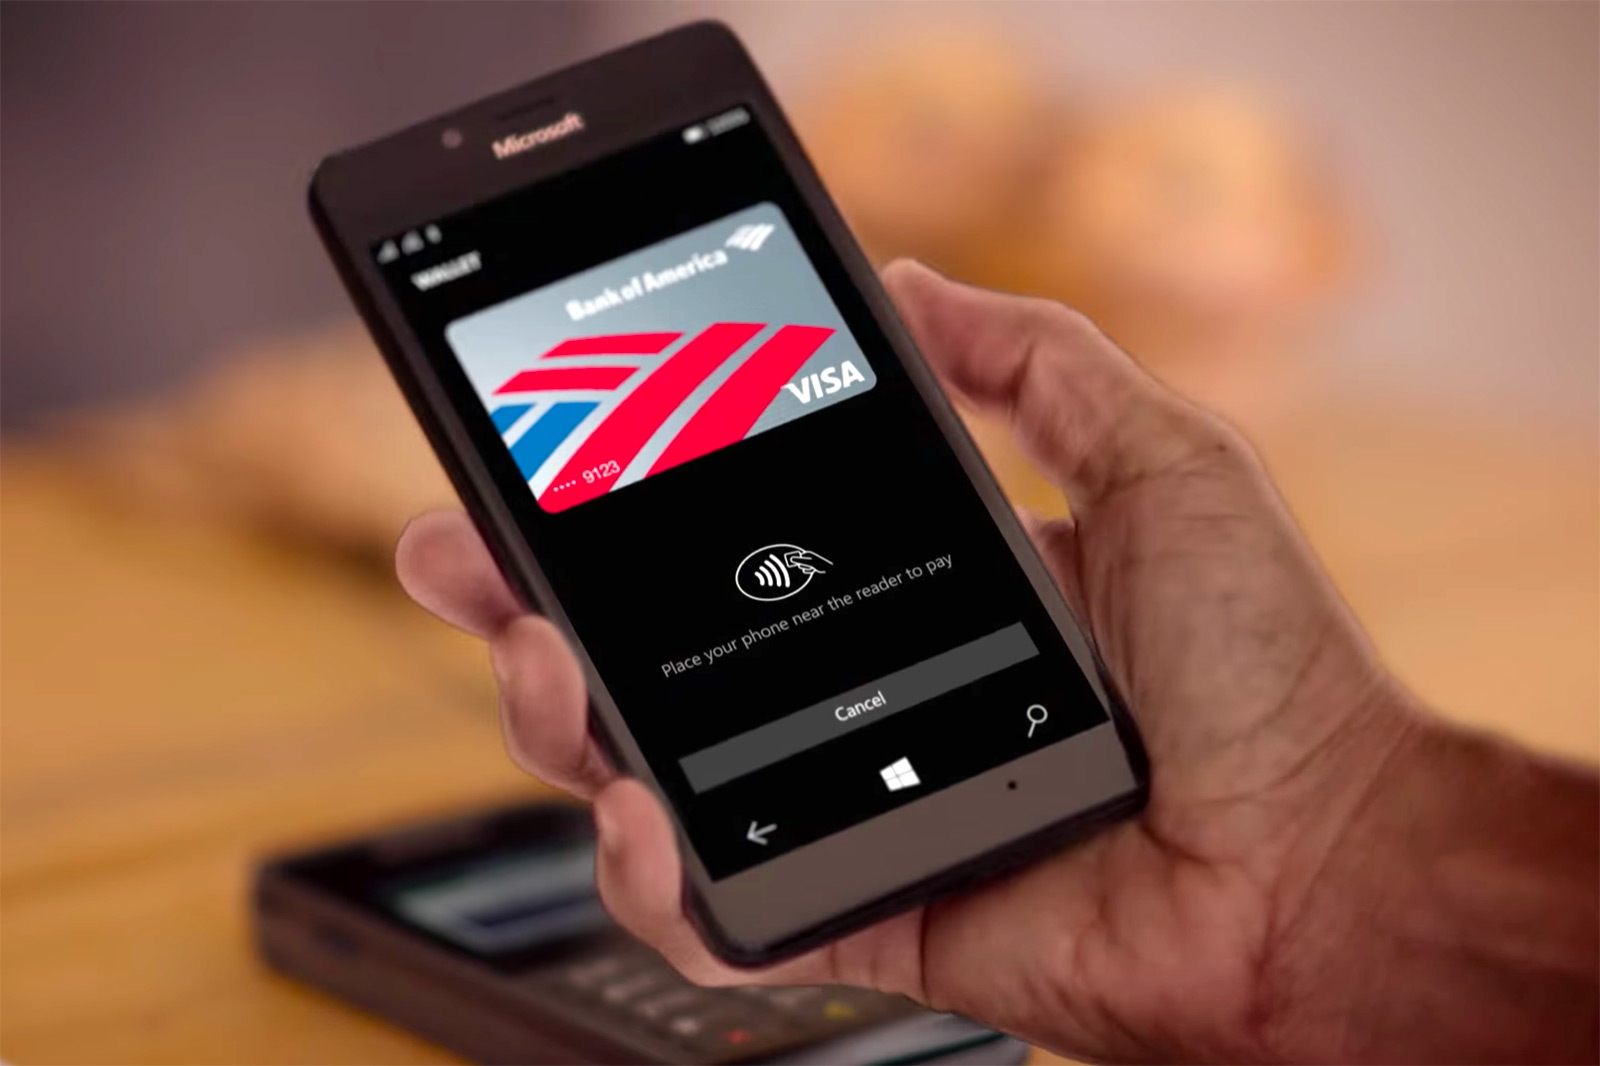 Microsoft brings mobile payments to your Windows 10 phone